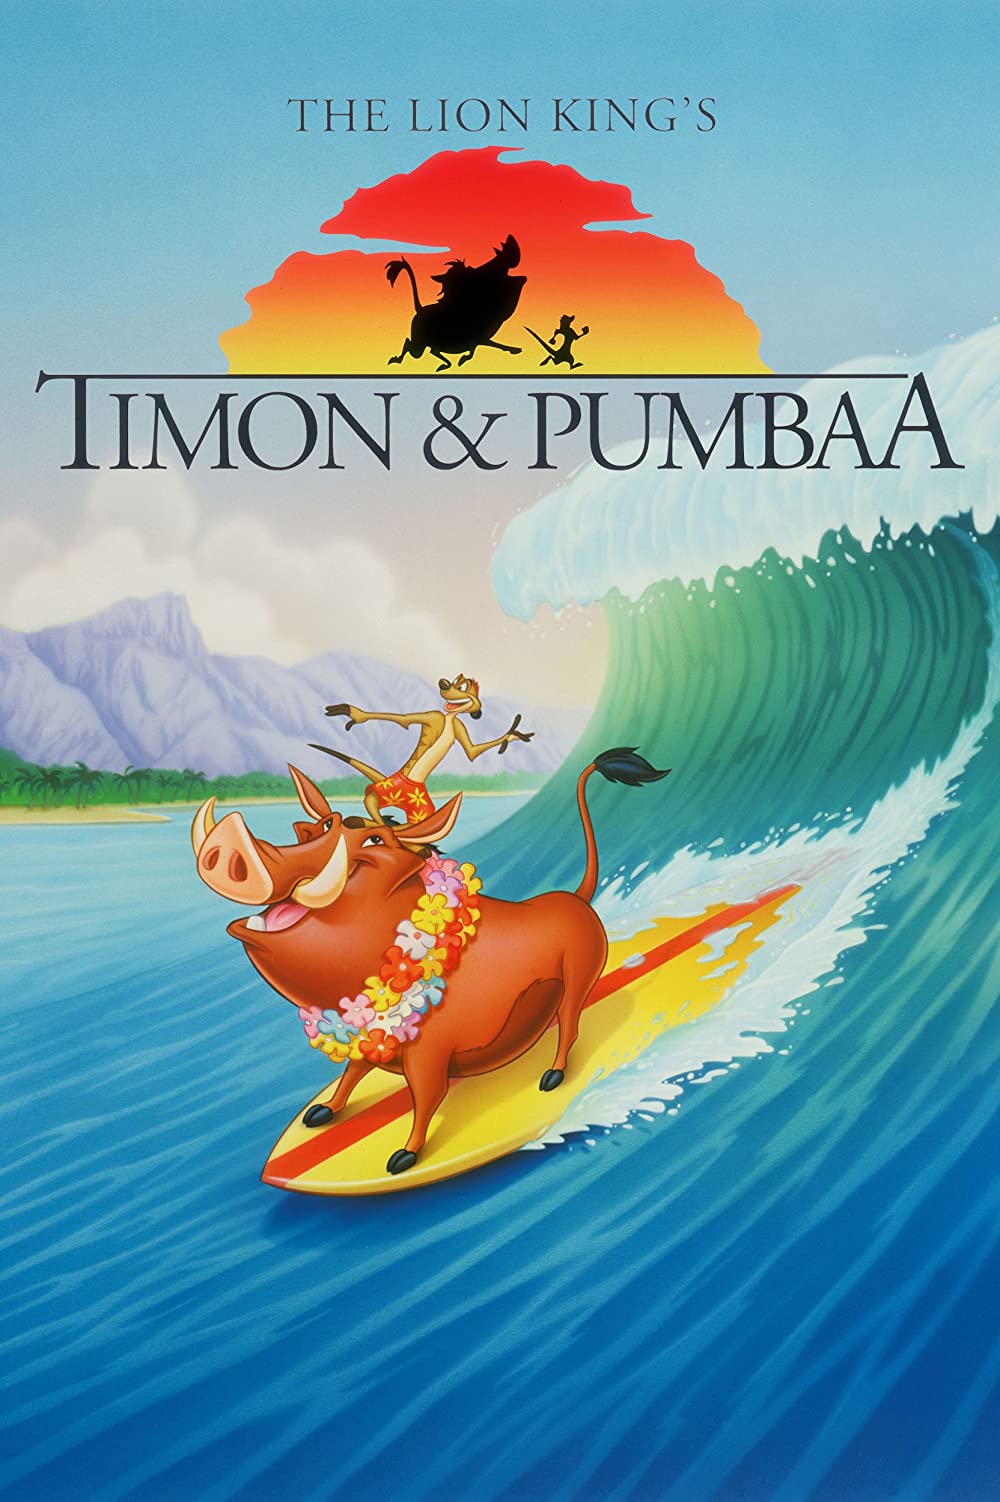 Timon & Pumbaa is one of cartoon old 90s show